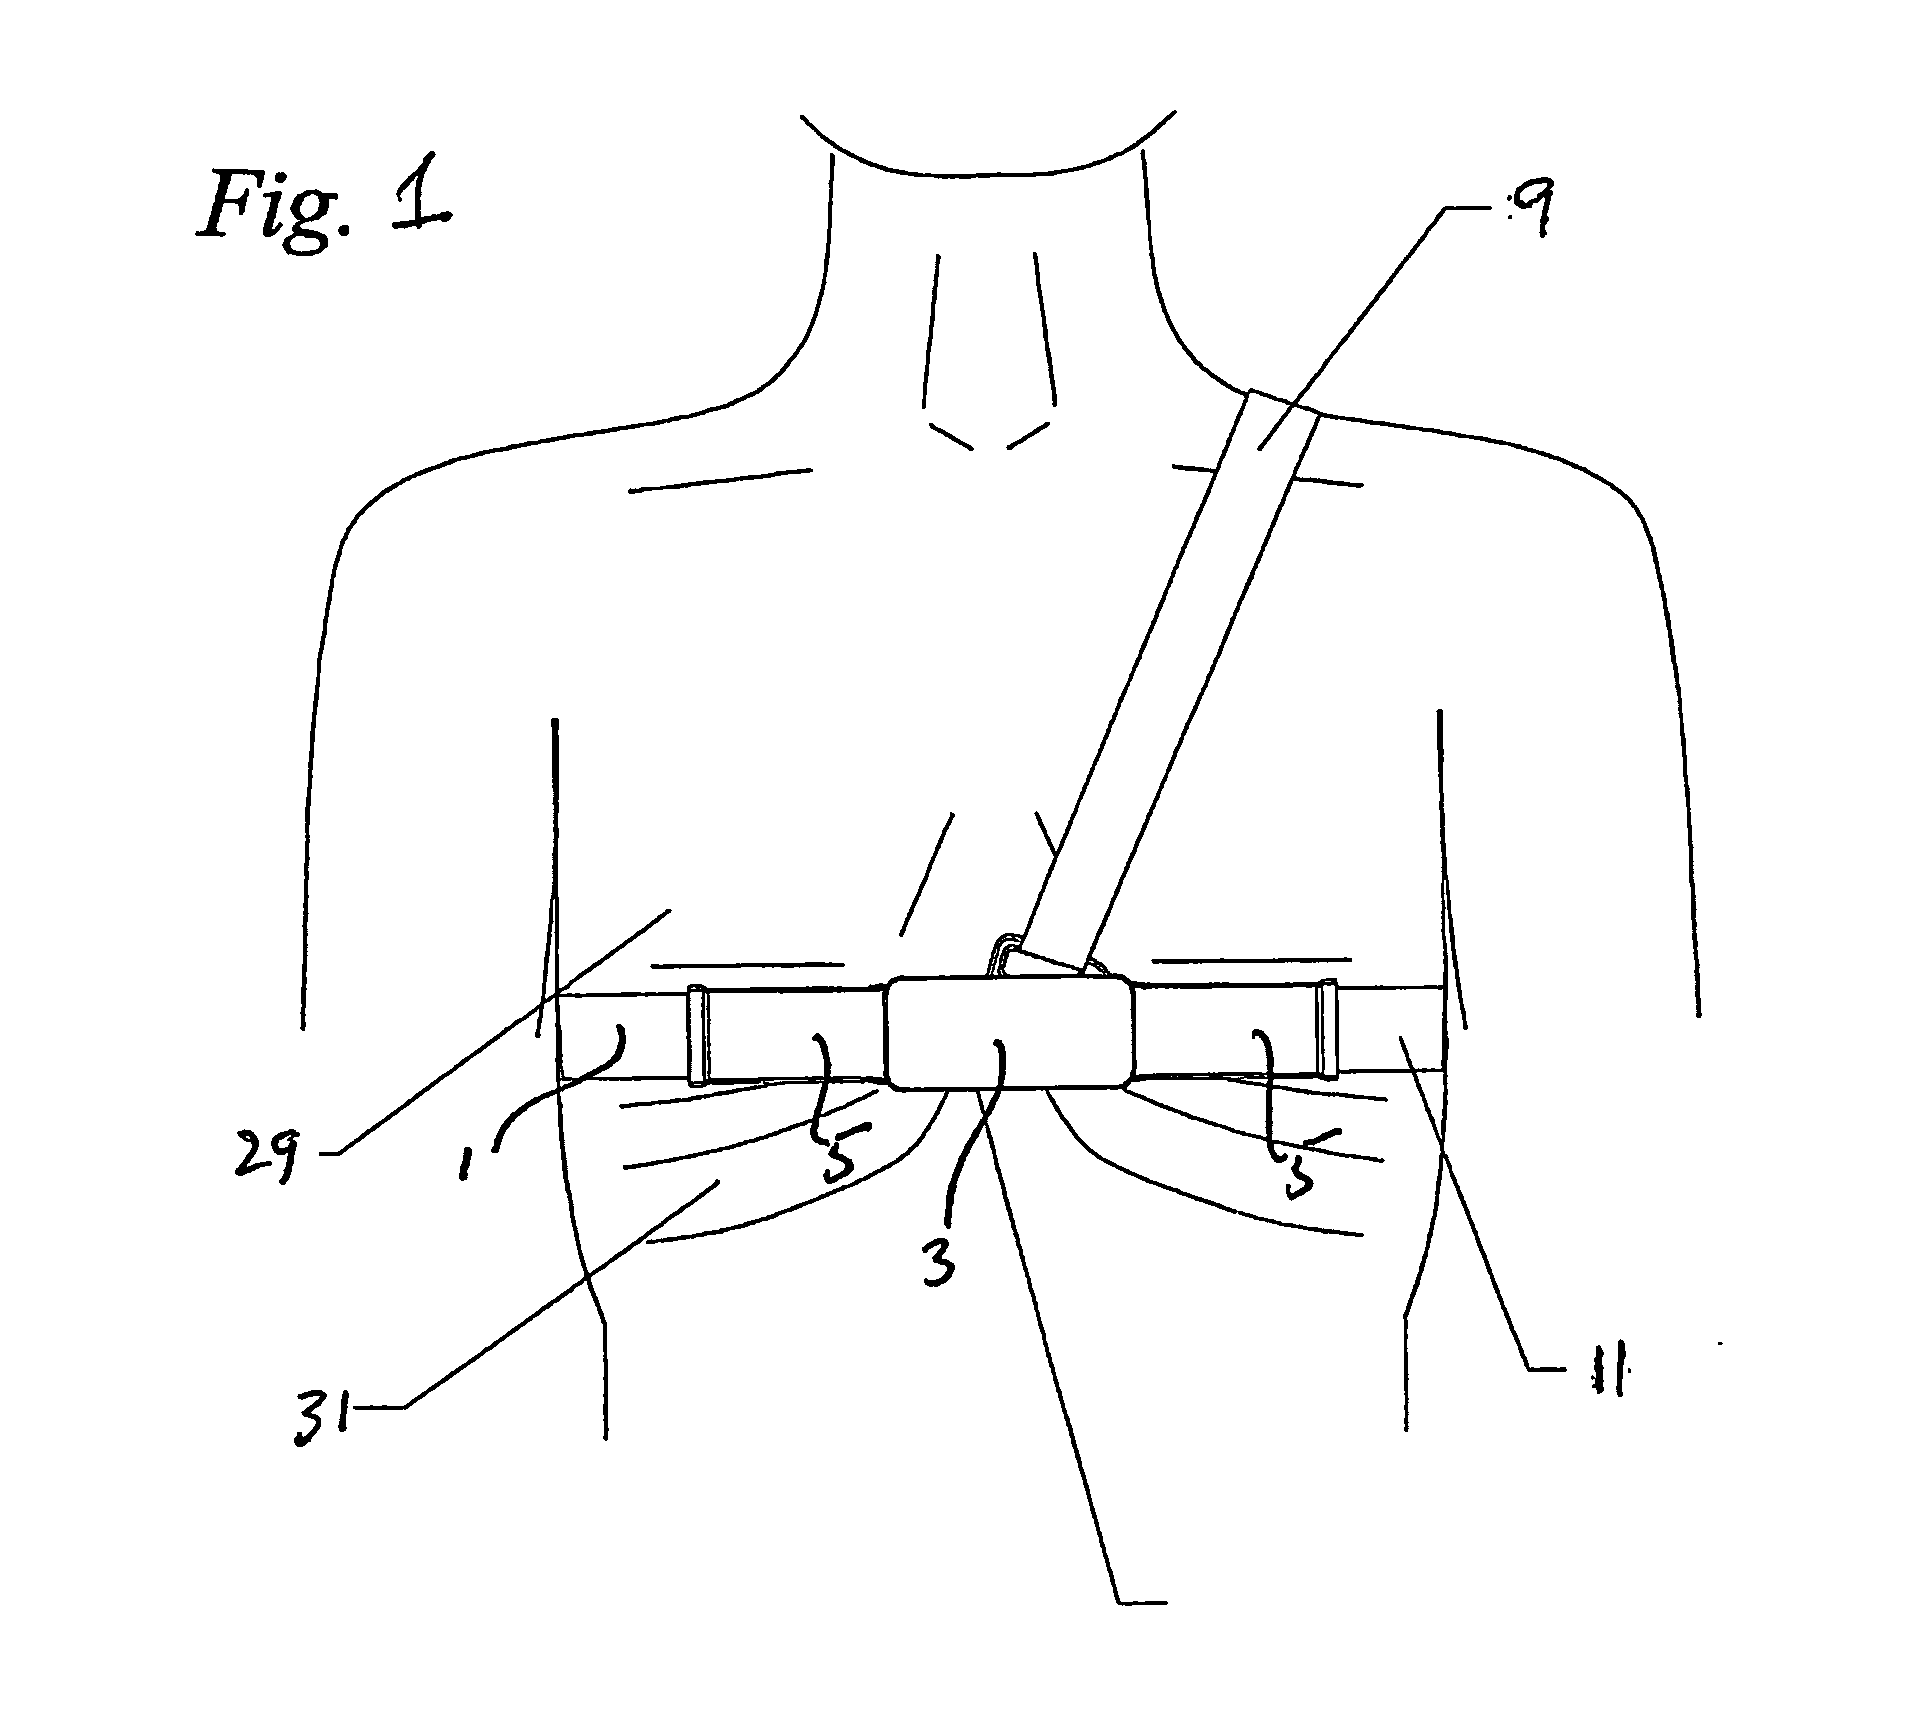 Respiration Motion Detection and Health State Assesment System